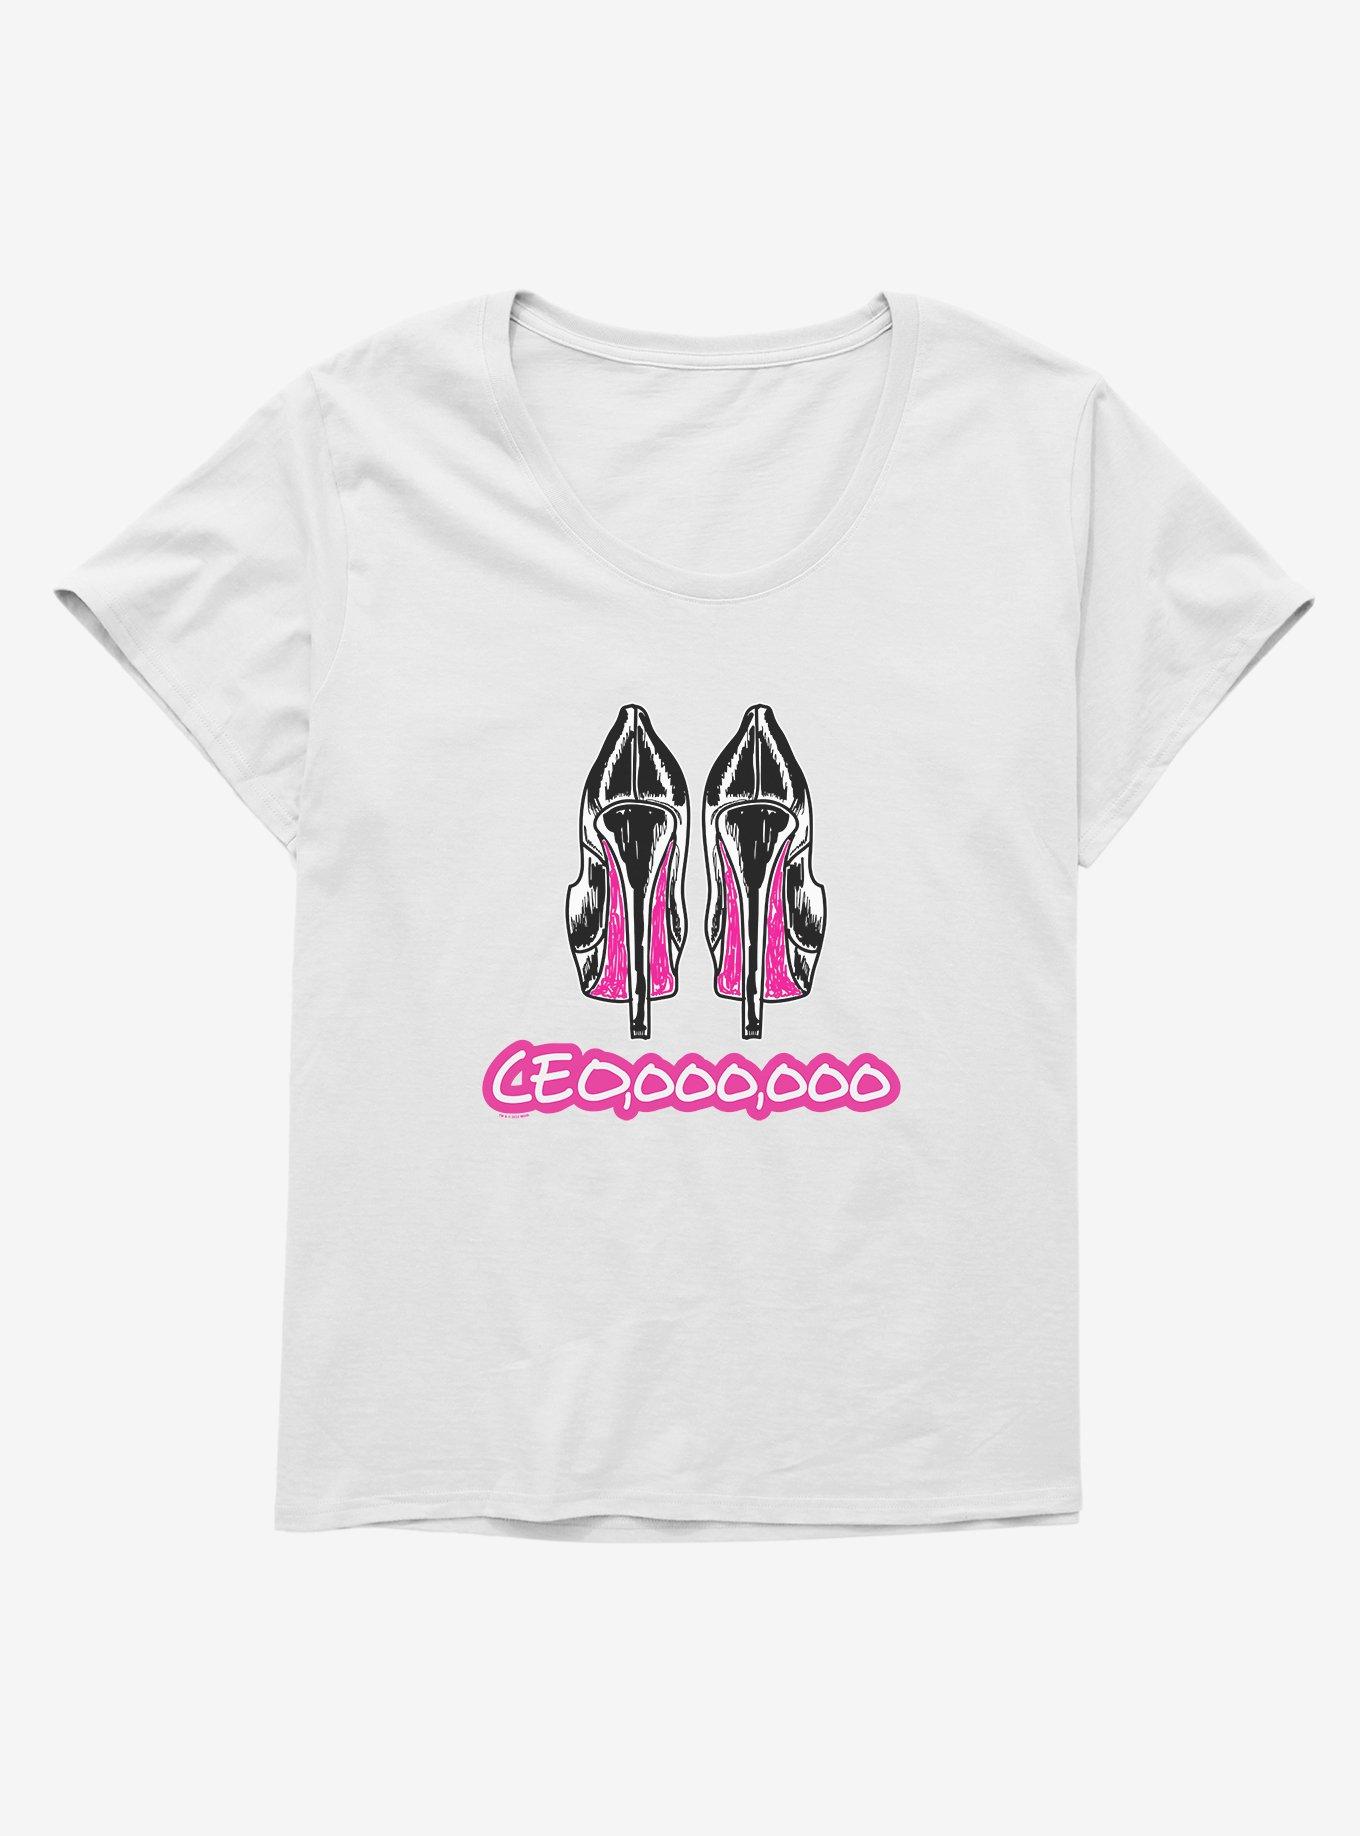 Legally Blonde CEO Girls T-Shirt Plus